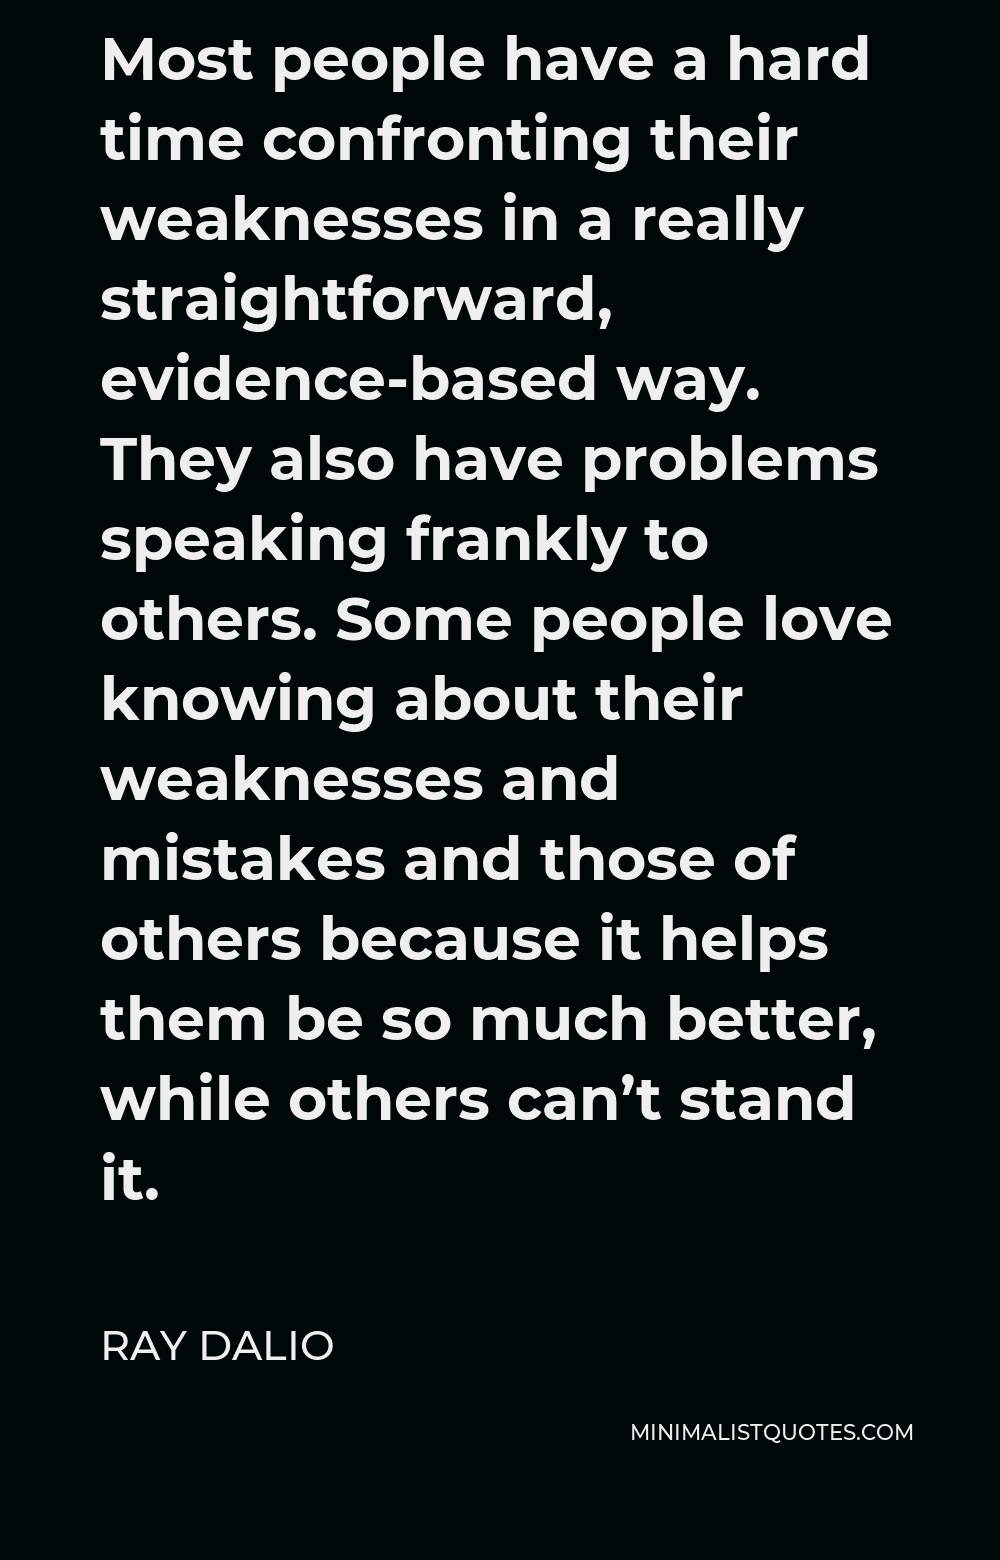 Ray Dalio Quote - Most people have a hard time confronting their weaknesses in a really straightforward, evidence-based way. They also have problems speaking frankly to others. Some people love knowing about their weaknesses and mistakes and those of others because it helps them be so much better, while others can’t stand it.